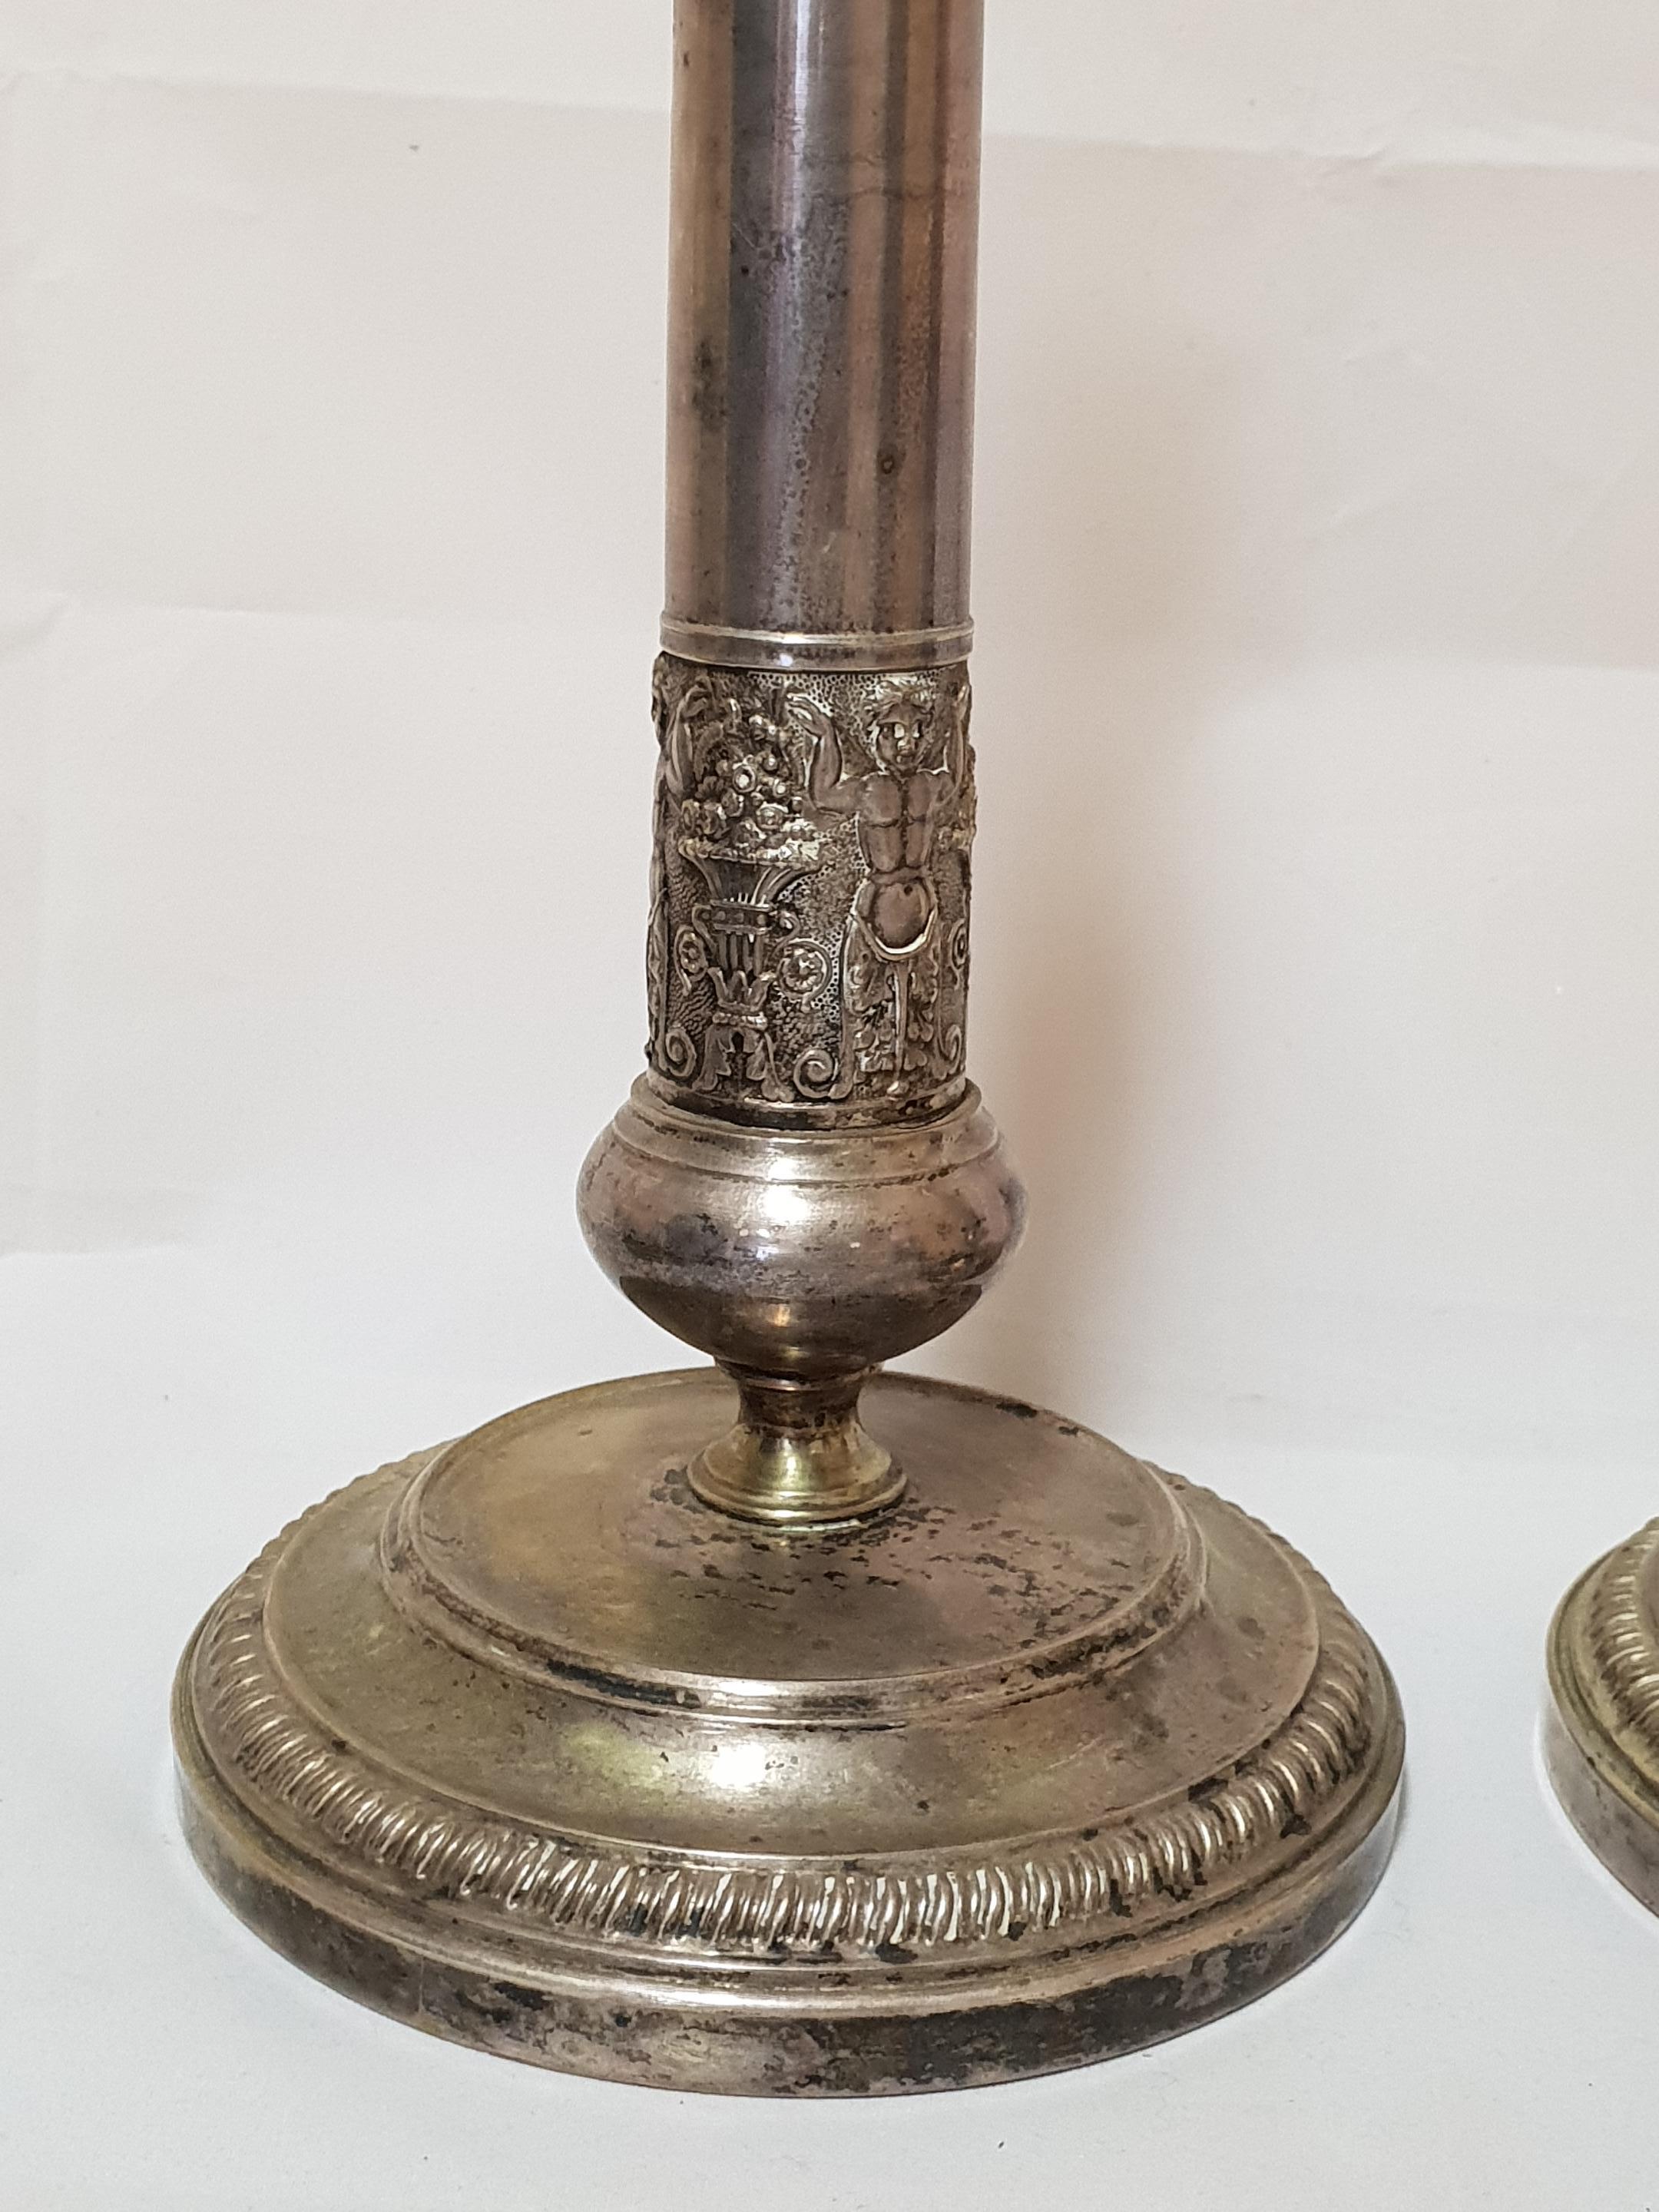 Pair of Neoclassical Silver Plated Candlesticks, 1830s (Französisch)